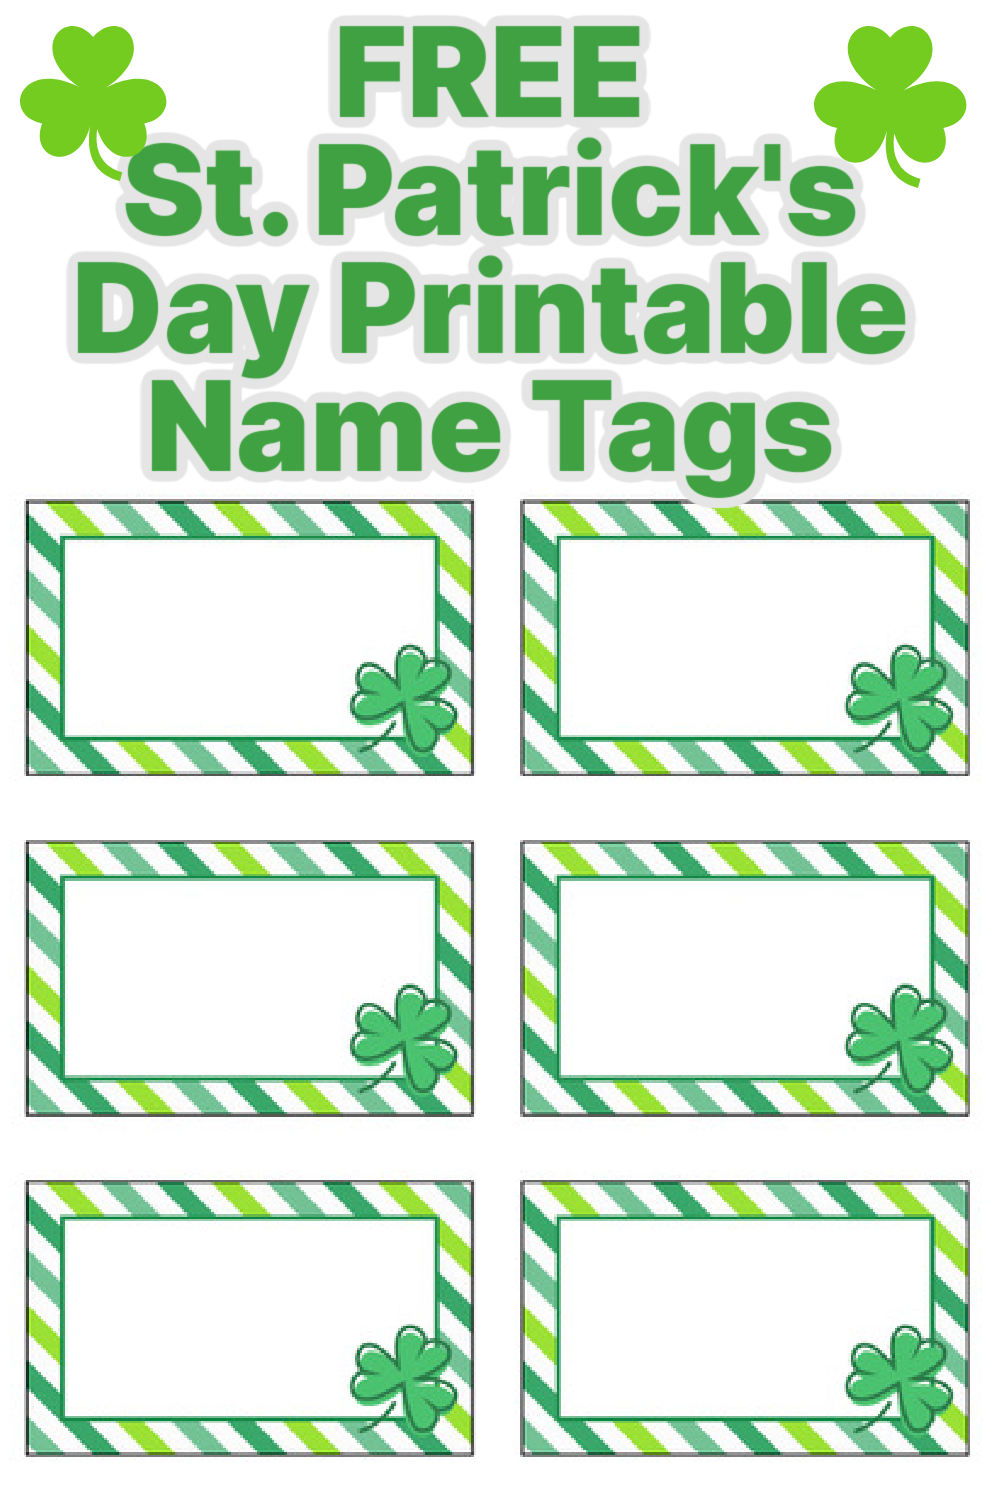 St patricks day printable name tags and party ideas